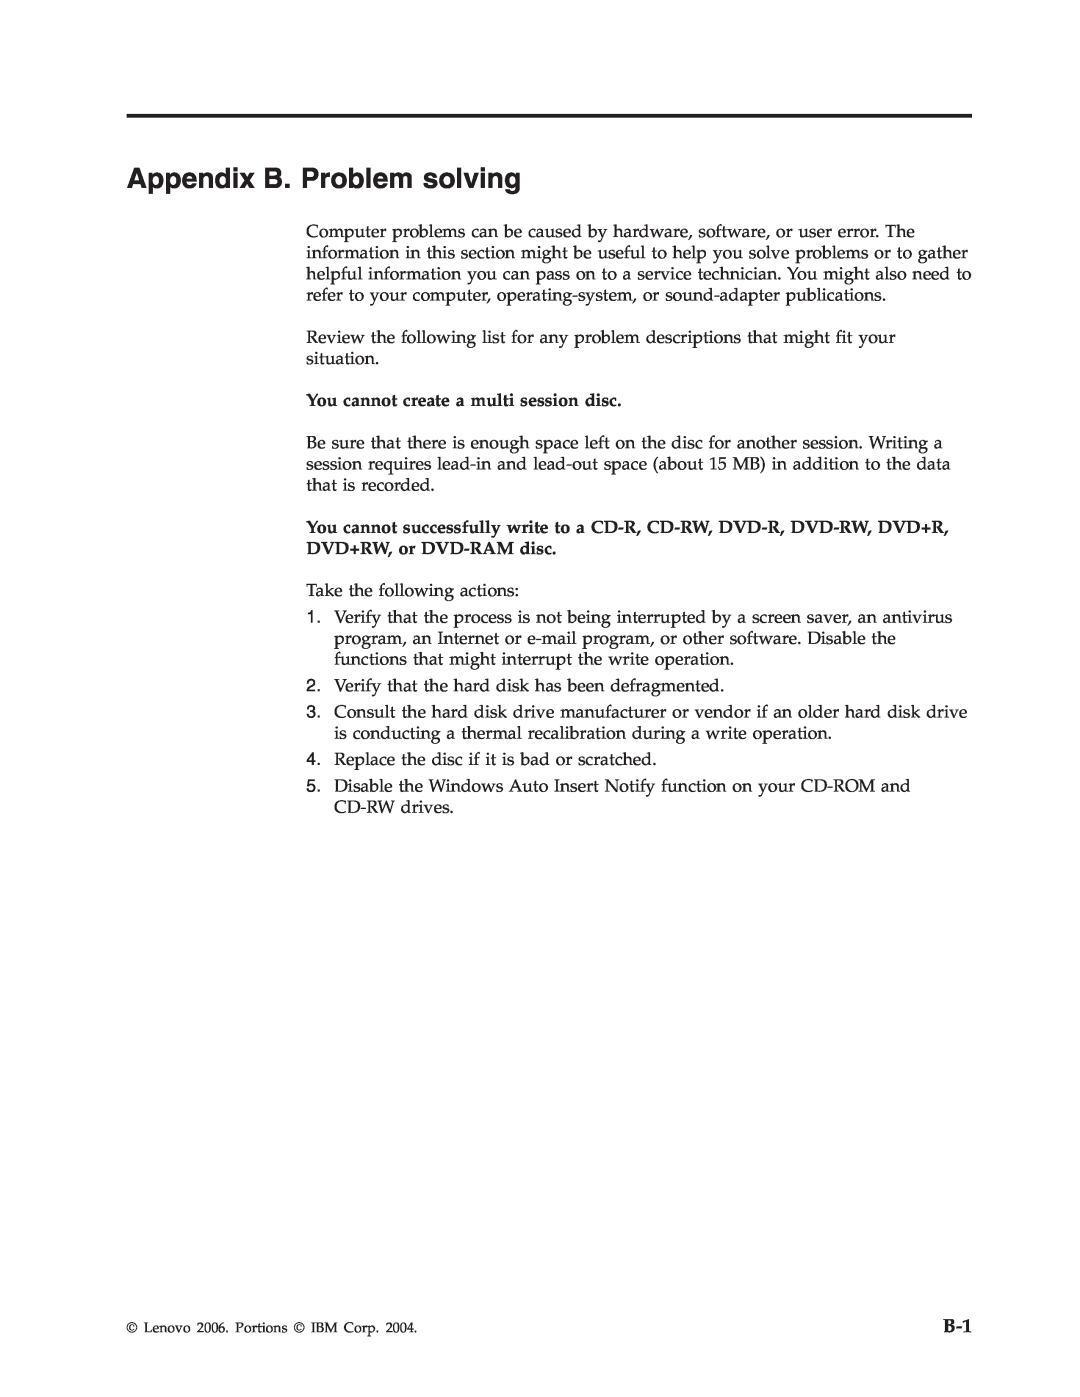 Lenovo 40Y8710 manual Appendix B. Problem solving, You cannot create a multi session disc 